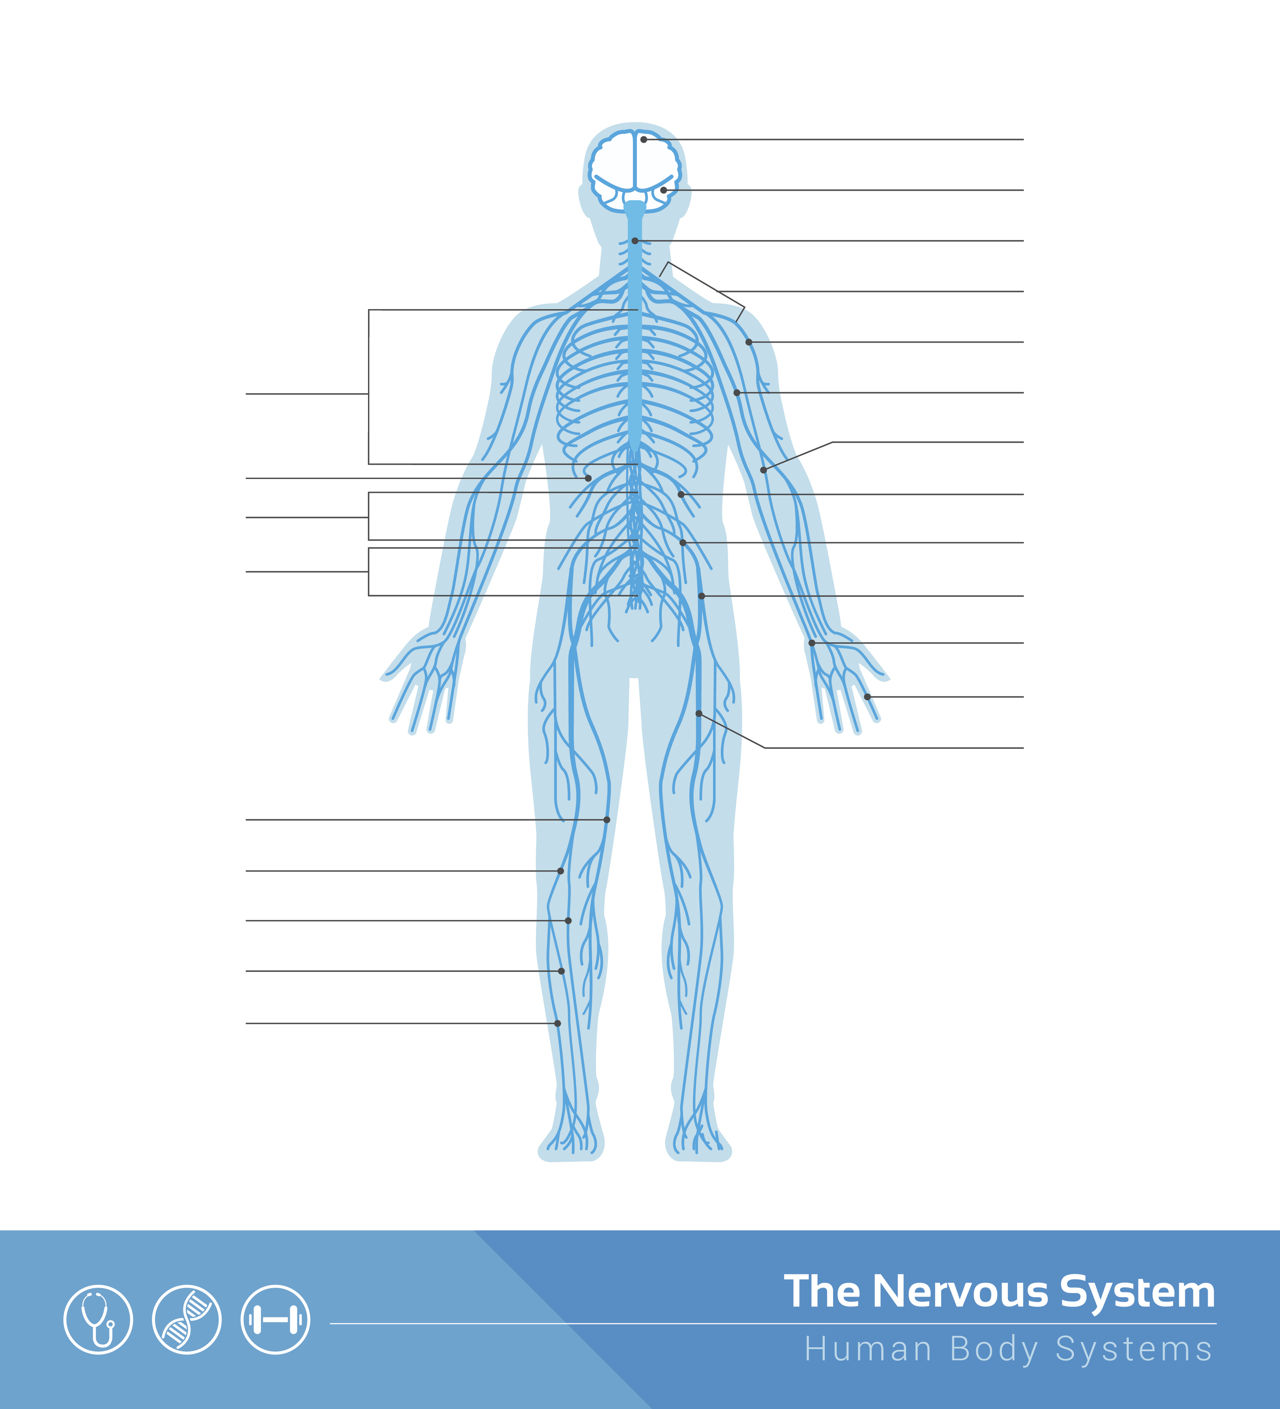 Human Nervous System Structure and Functions Explained ...